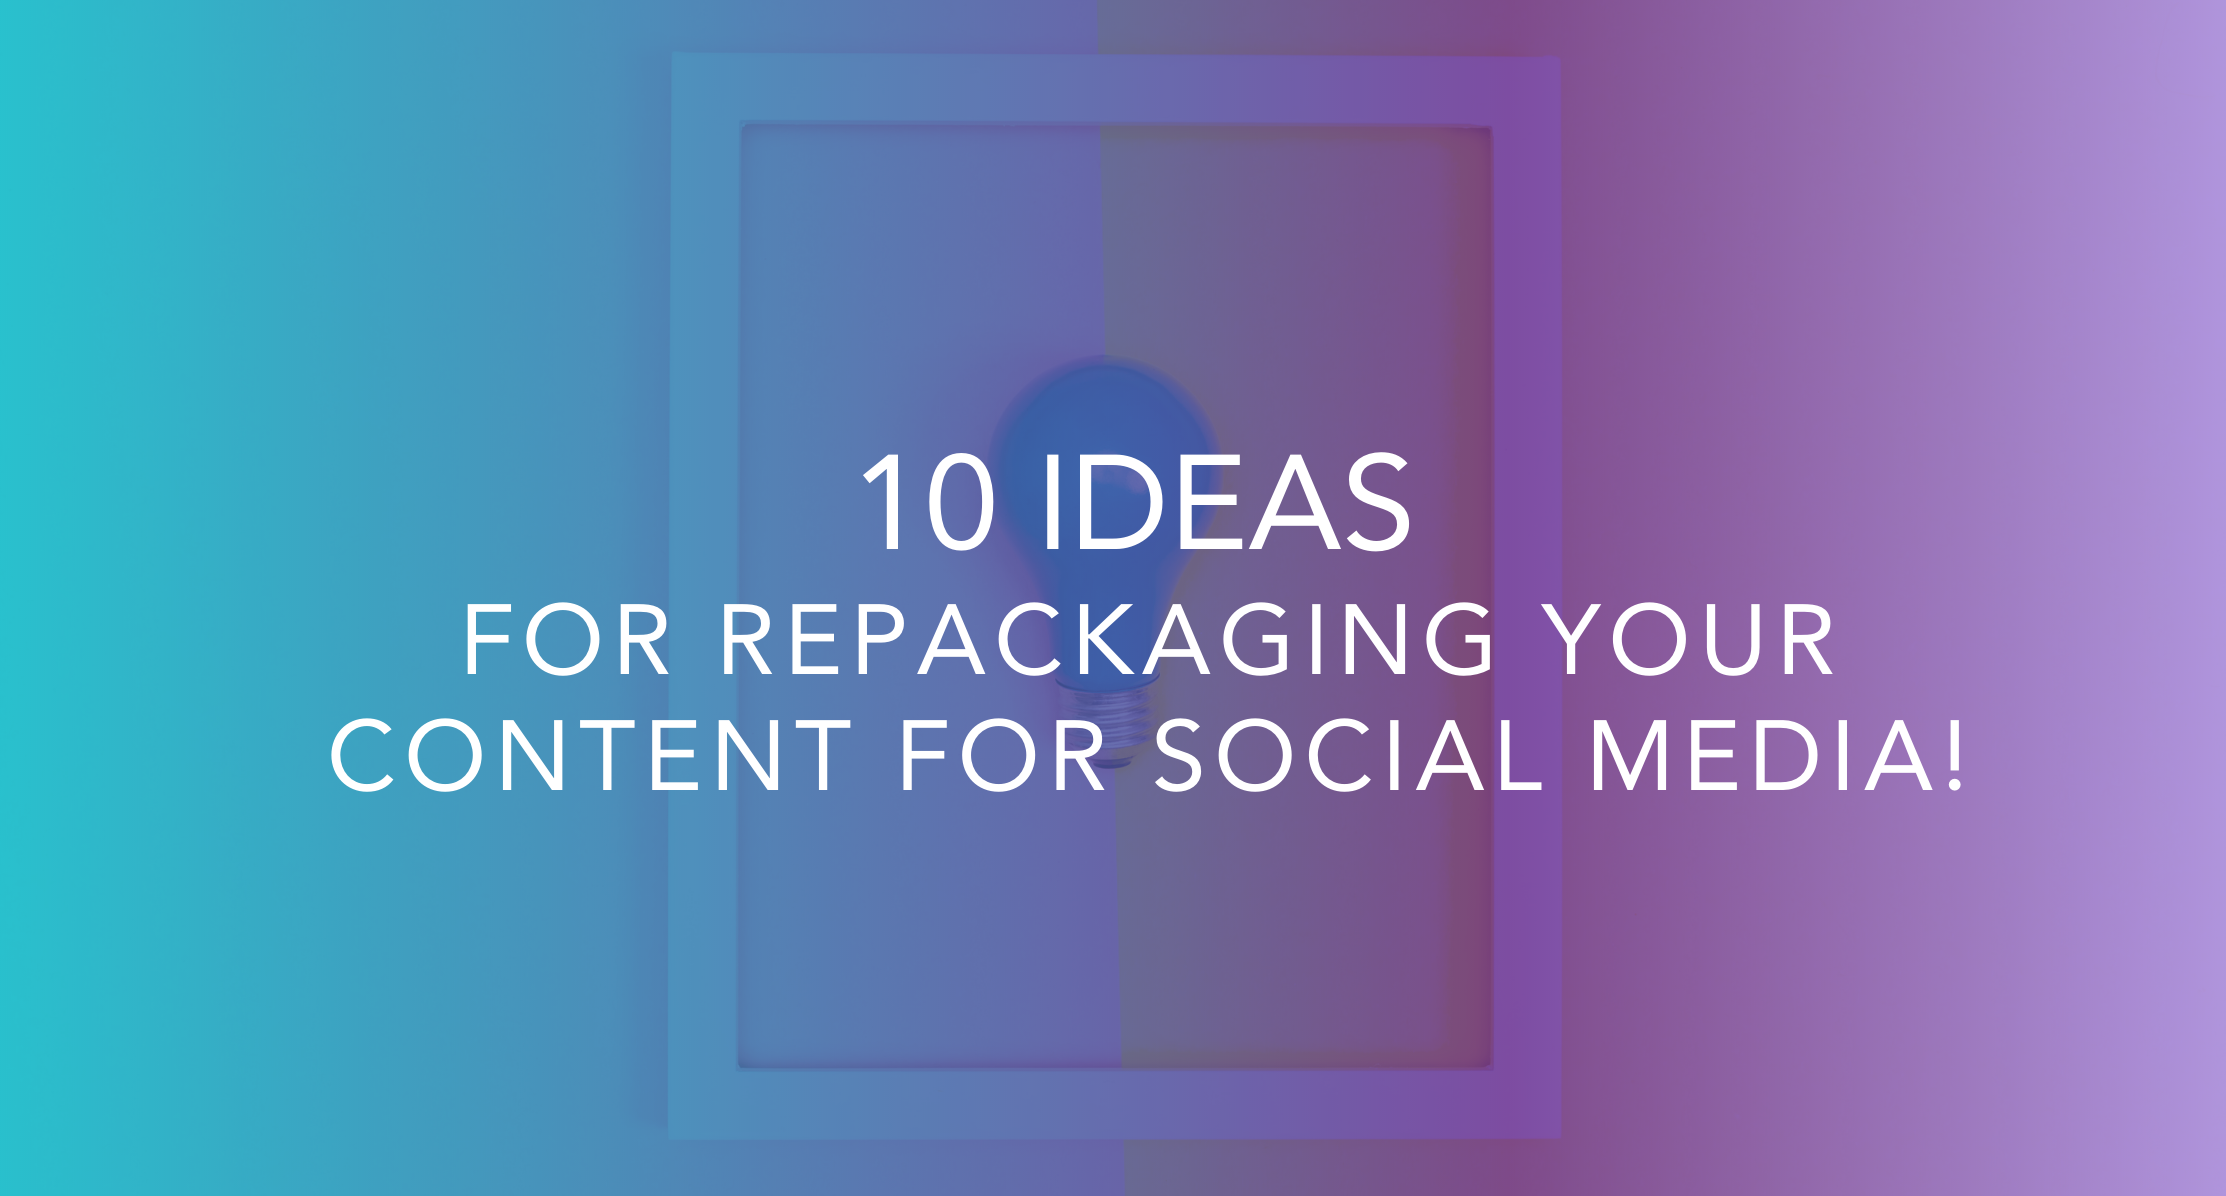 10 Ideas for Repackaging Your Content For Social Media